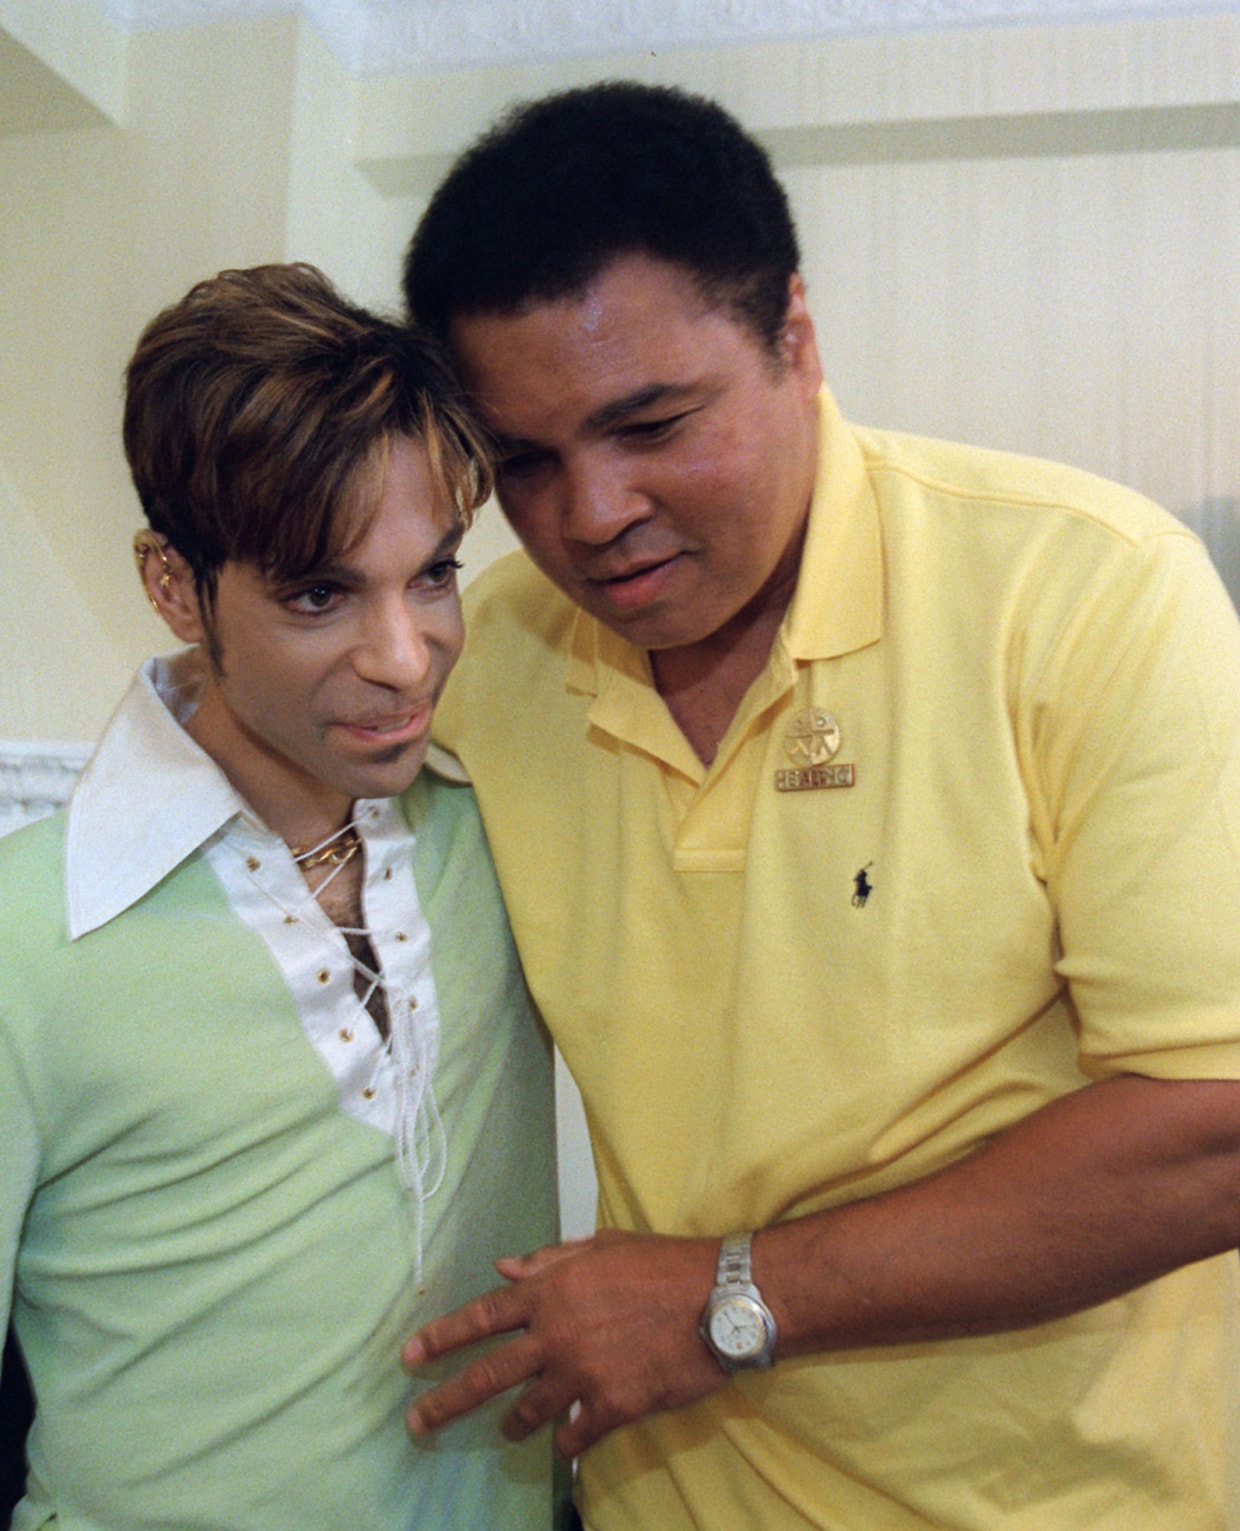 Essay: 'The Greatest' Losses: What Prince and Muhammad Ali Shared